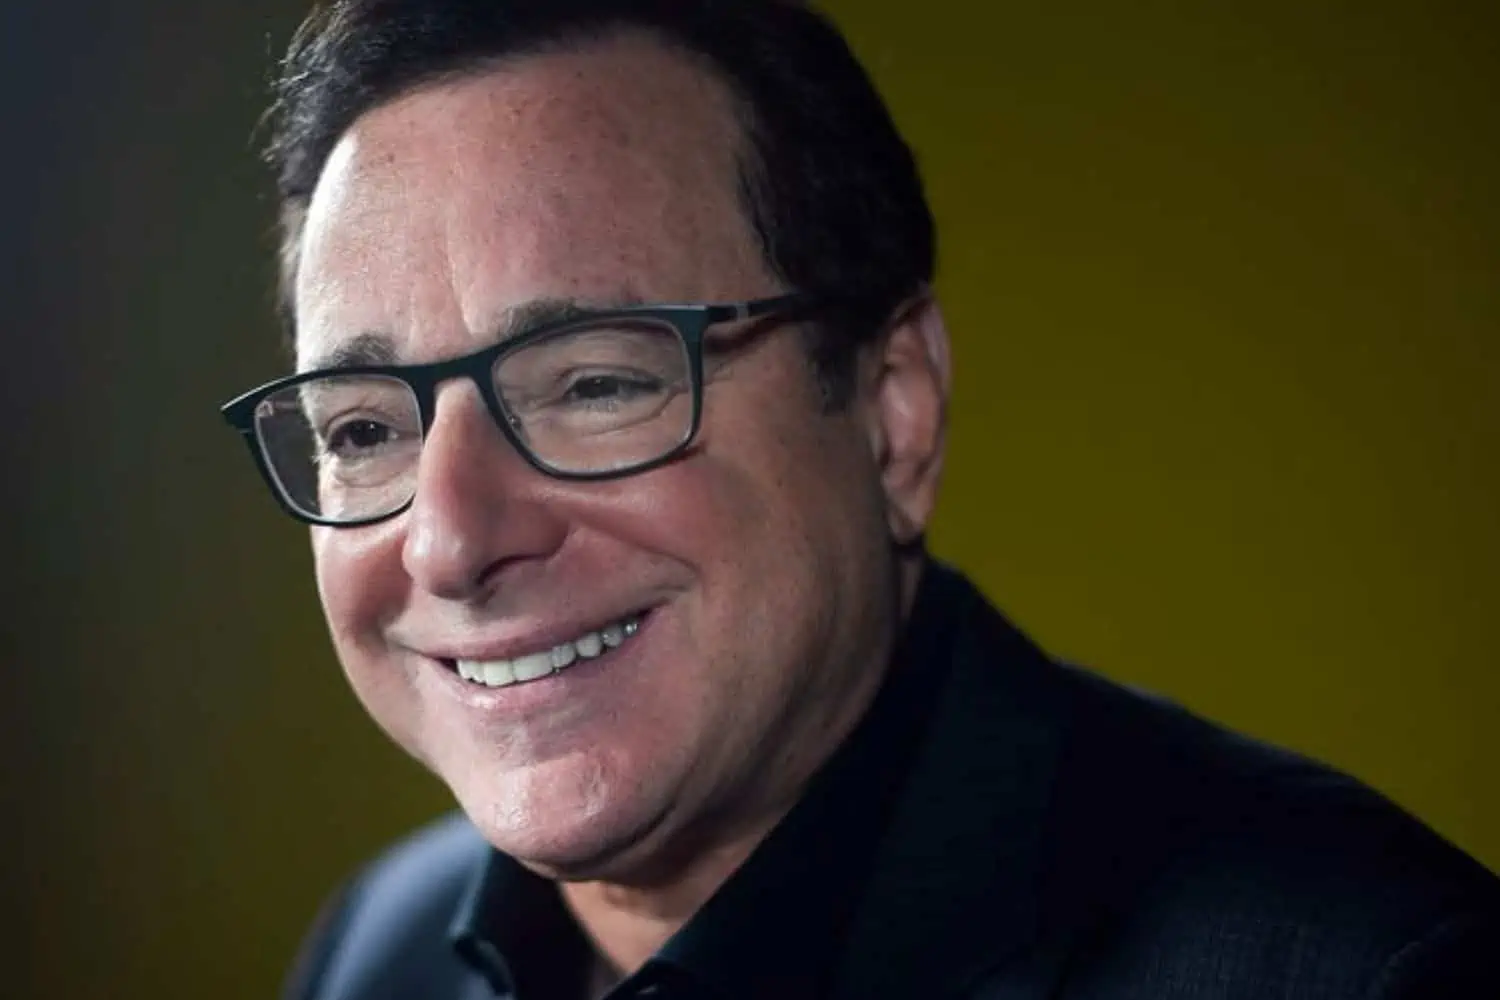 Bob Saget's cause of death confirmed - a blow to the head